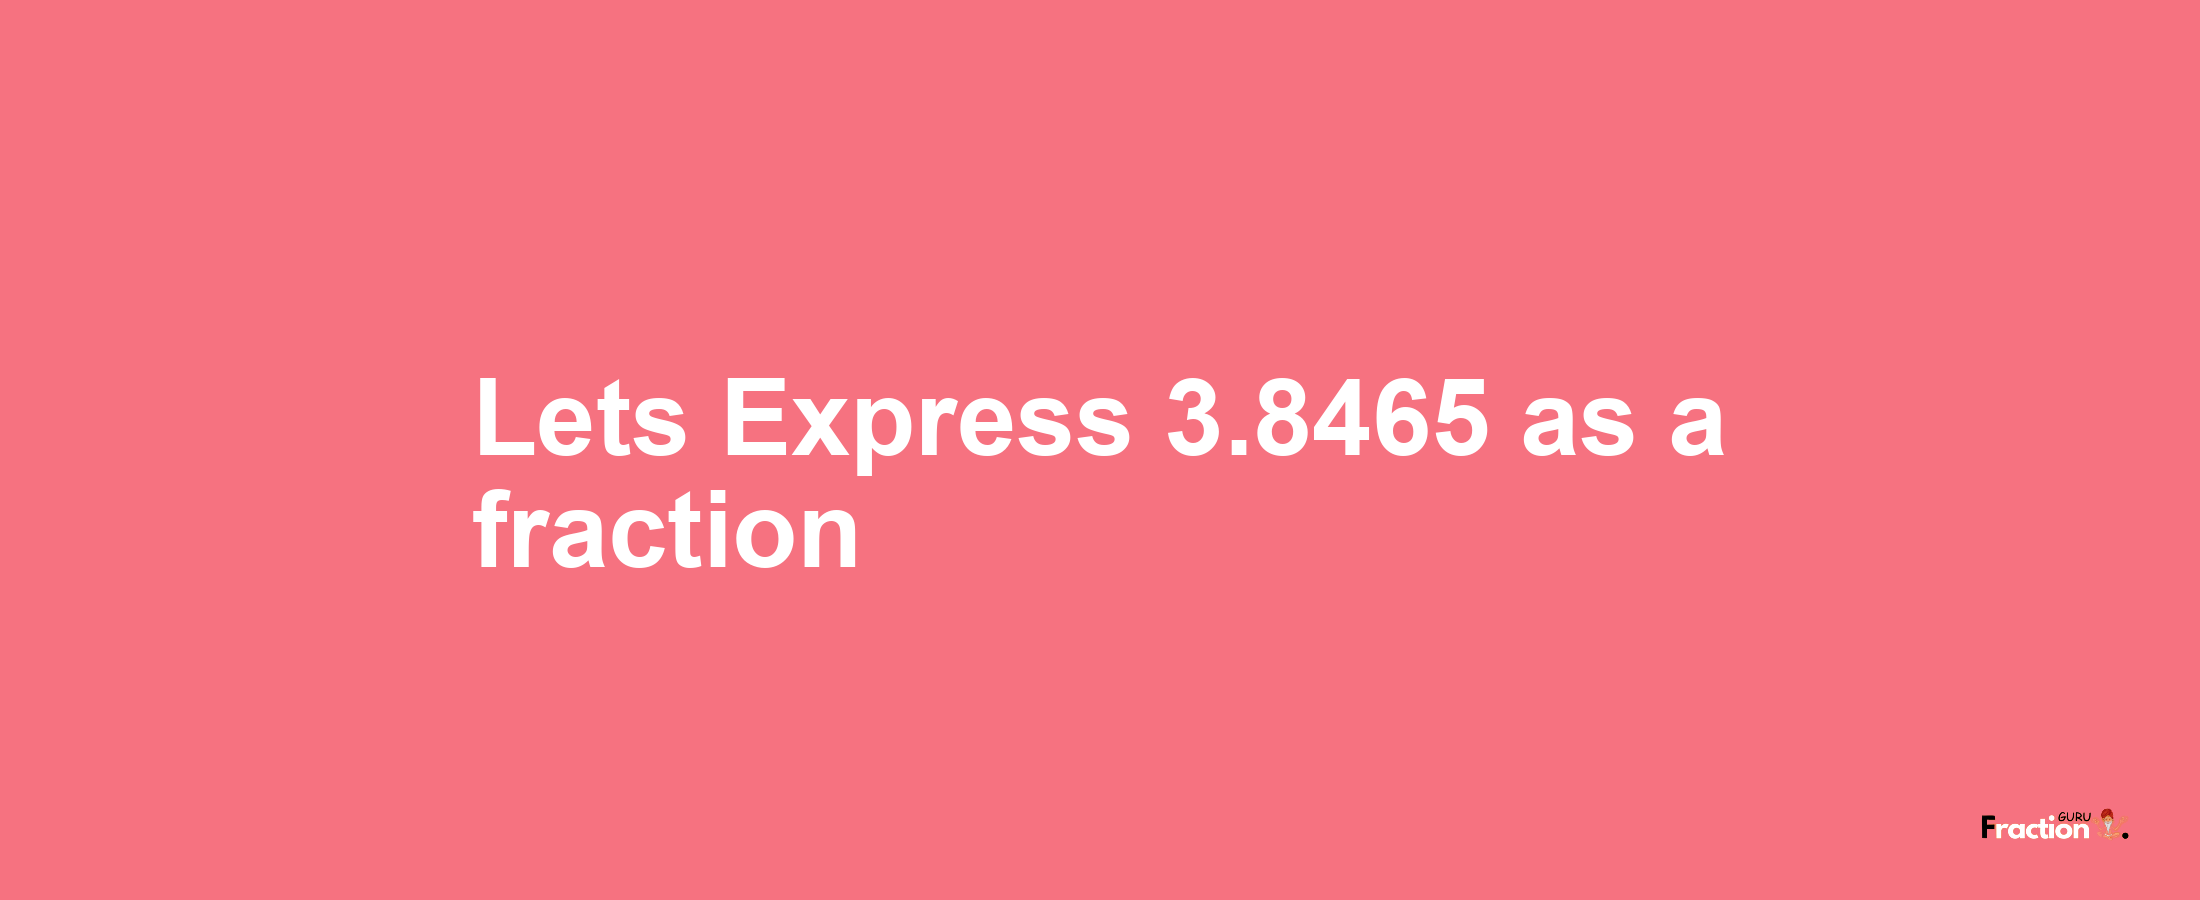 Lets Express 3.8465 as afraction